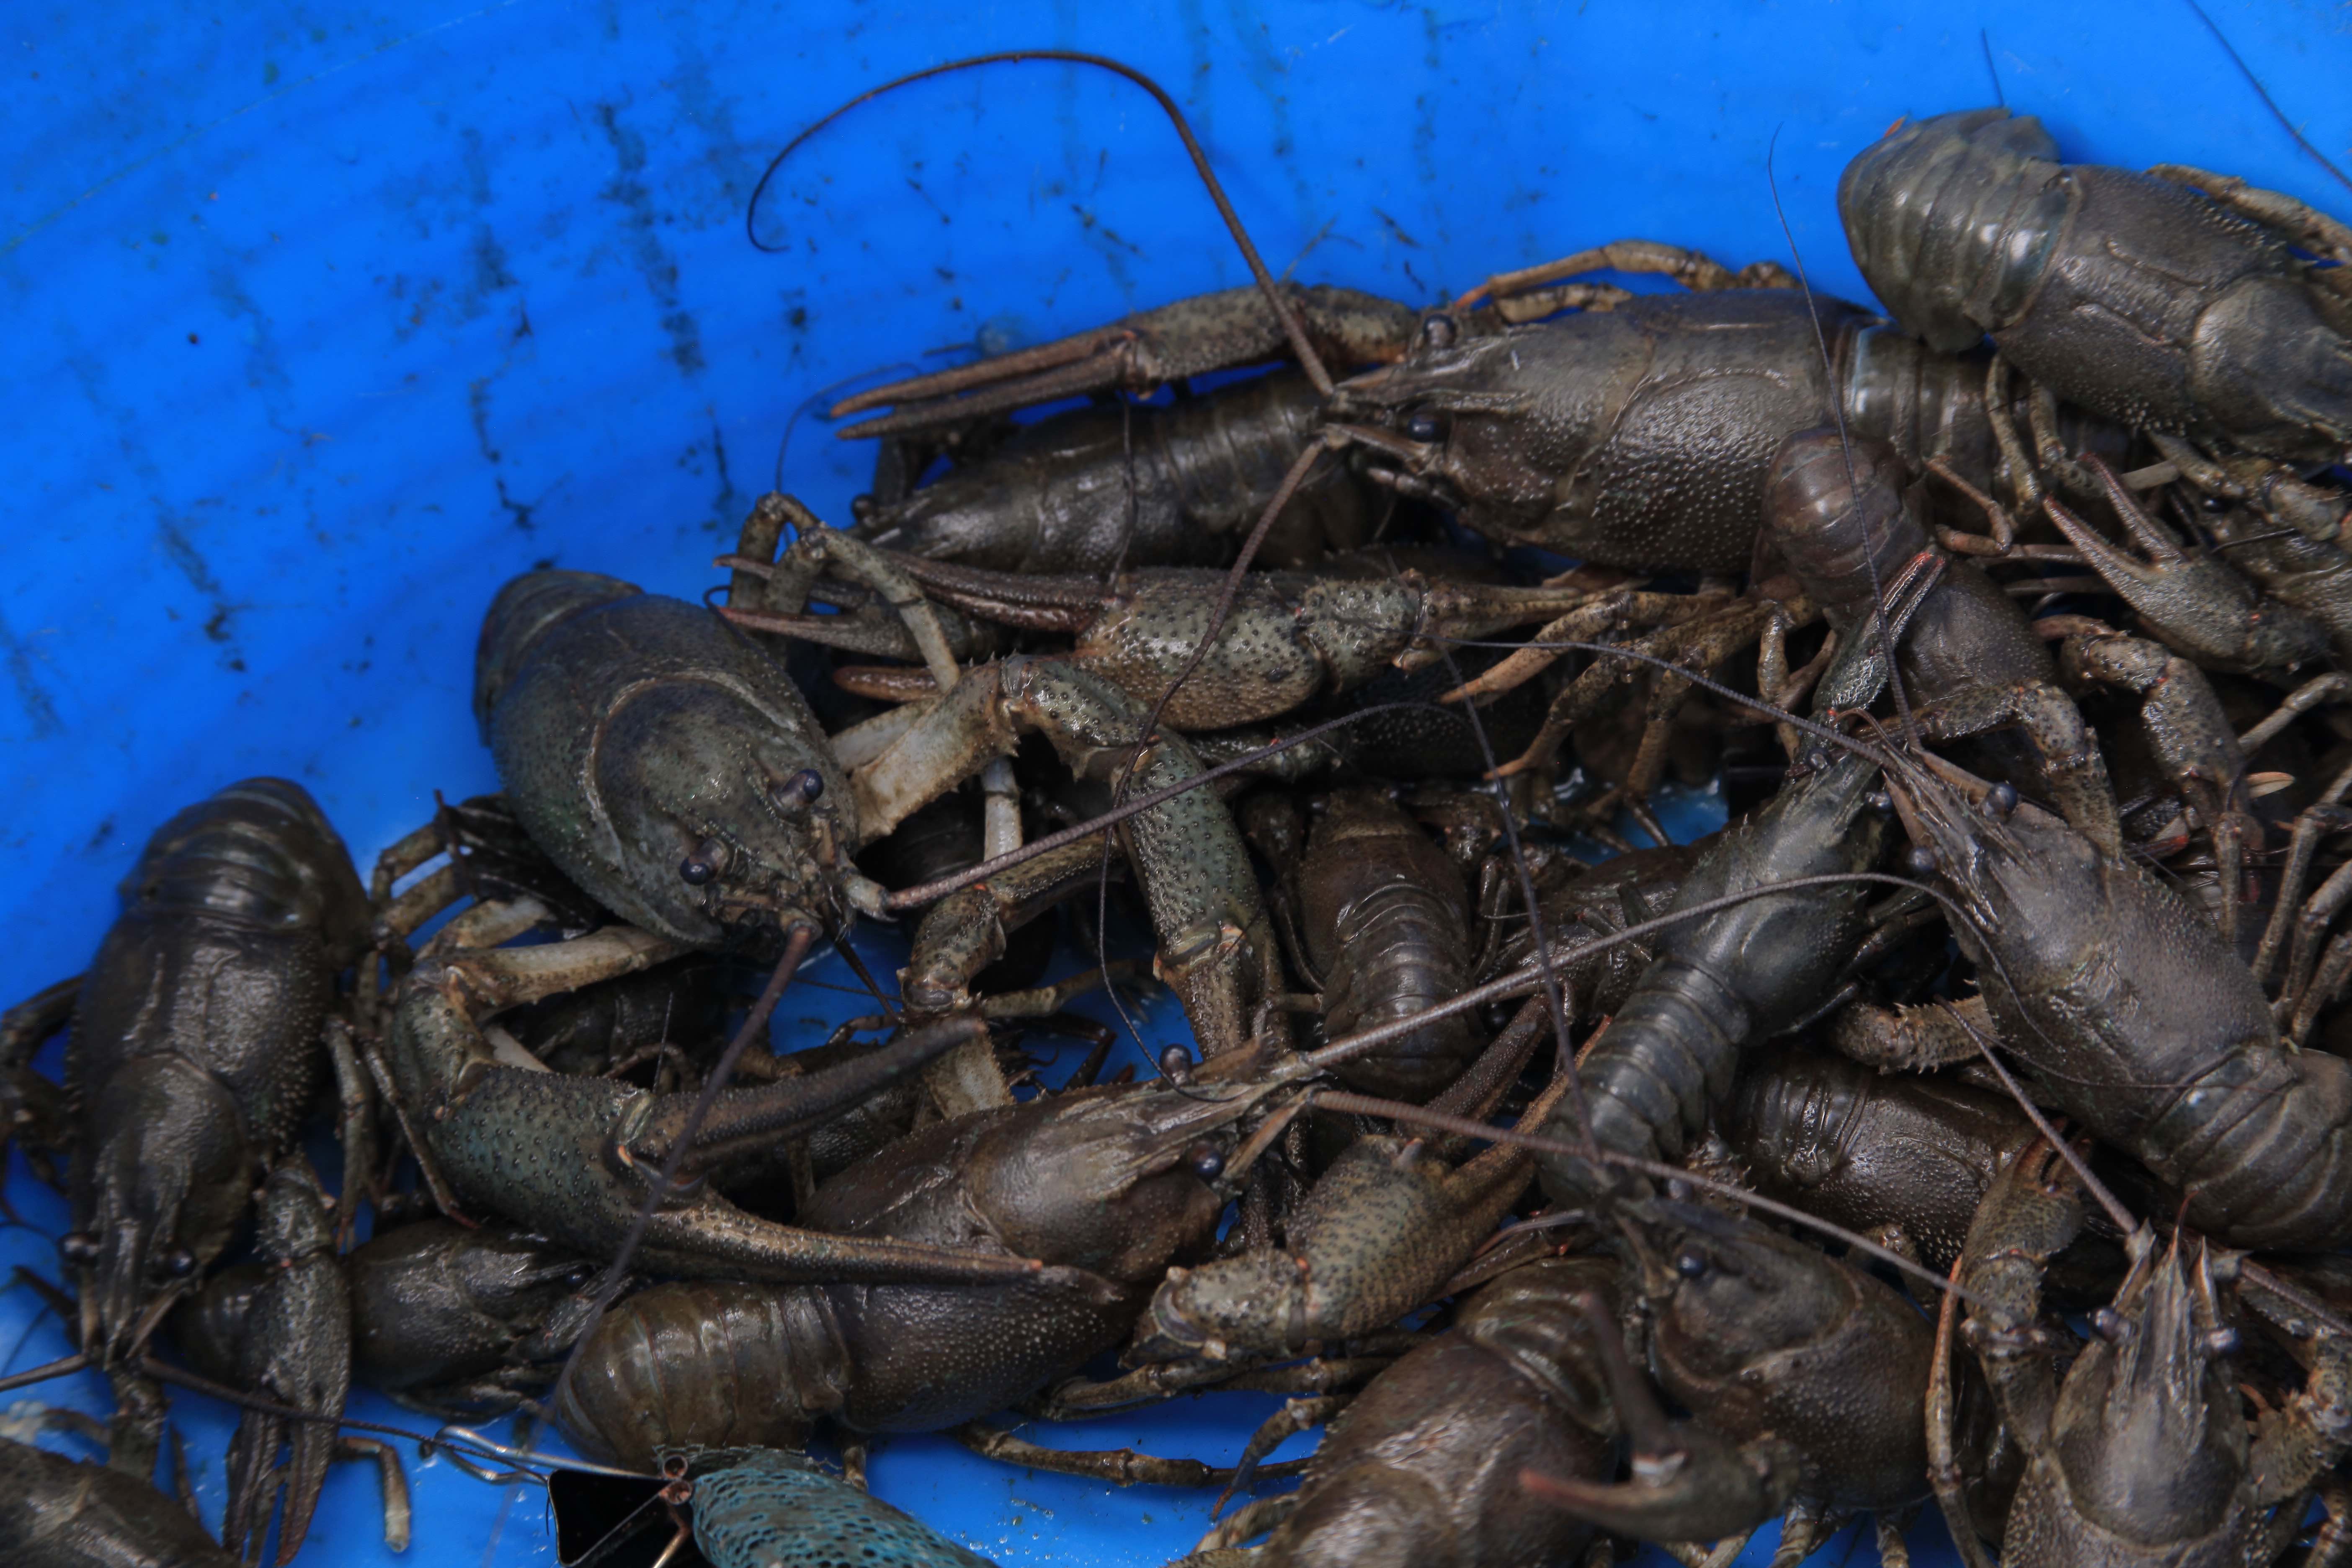 Several crayfish are clustered in a blue bucket. Photo by Jackie Turner.